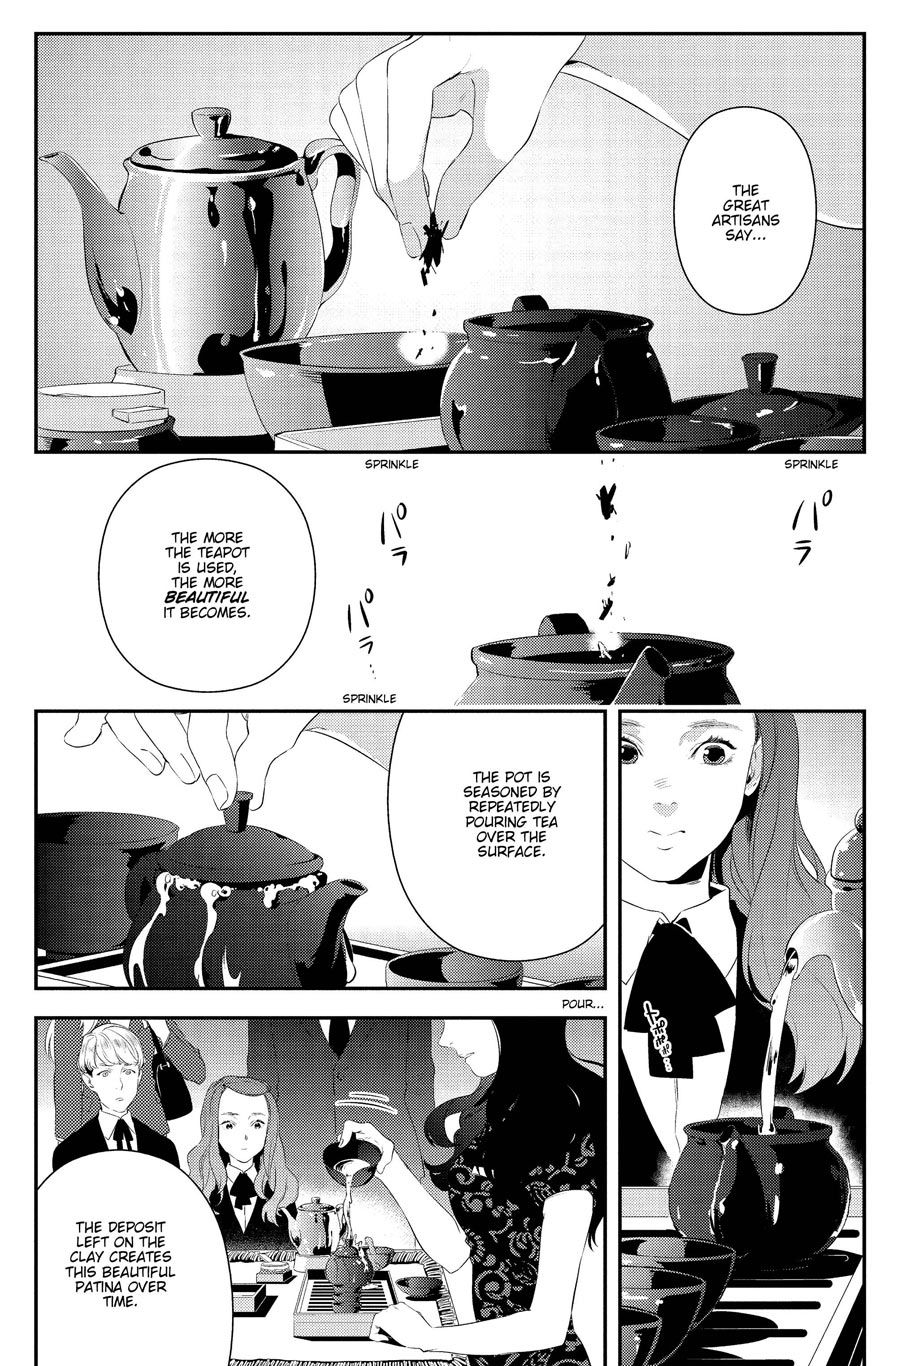 sherlockmanga_banker01_preview-first-page